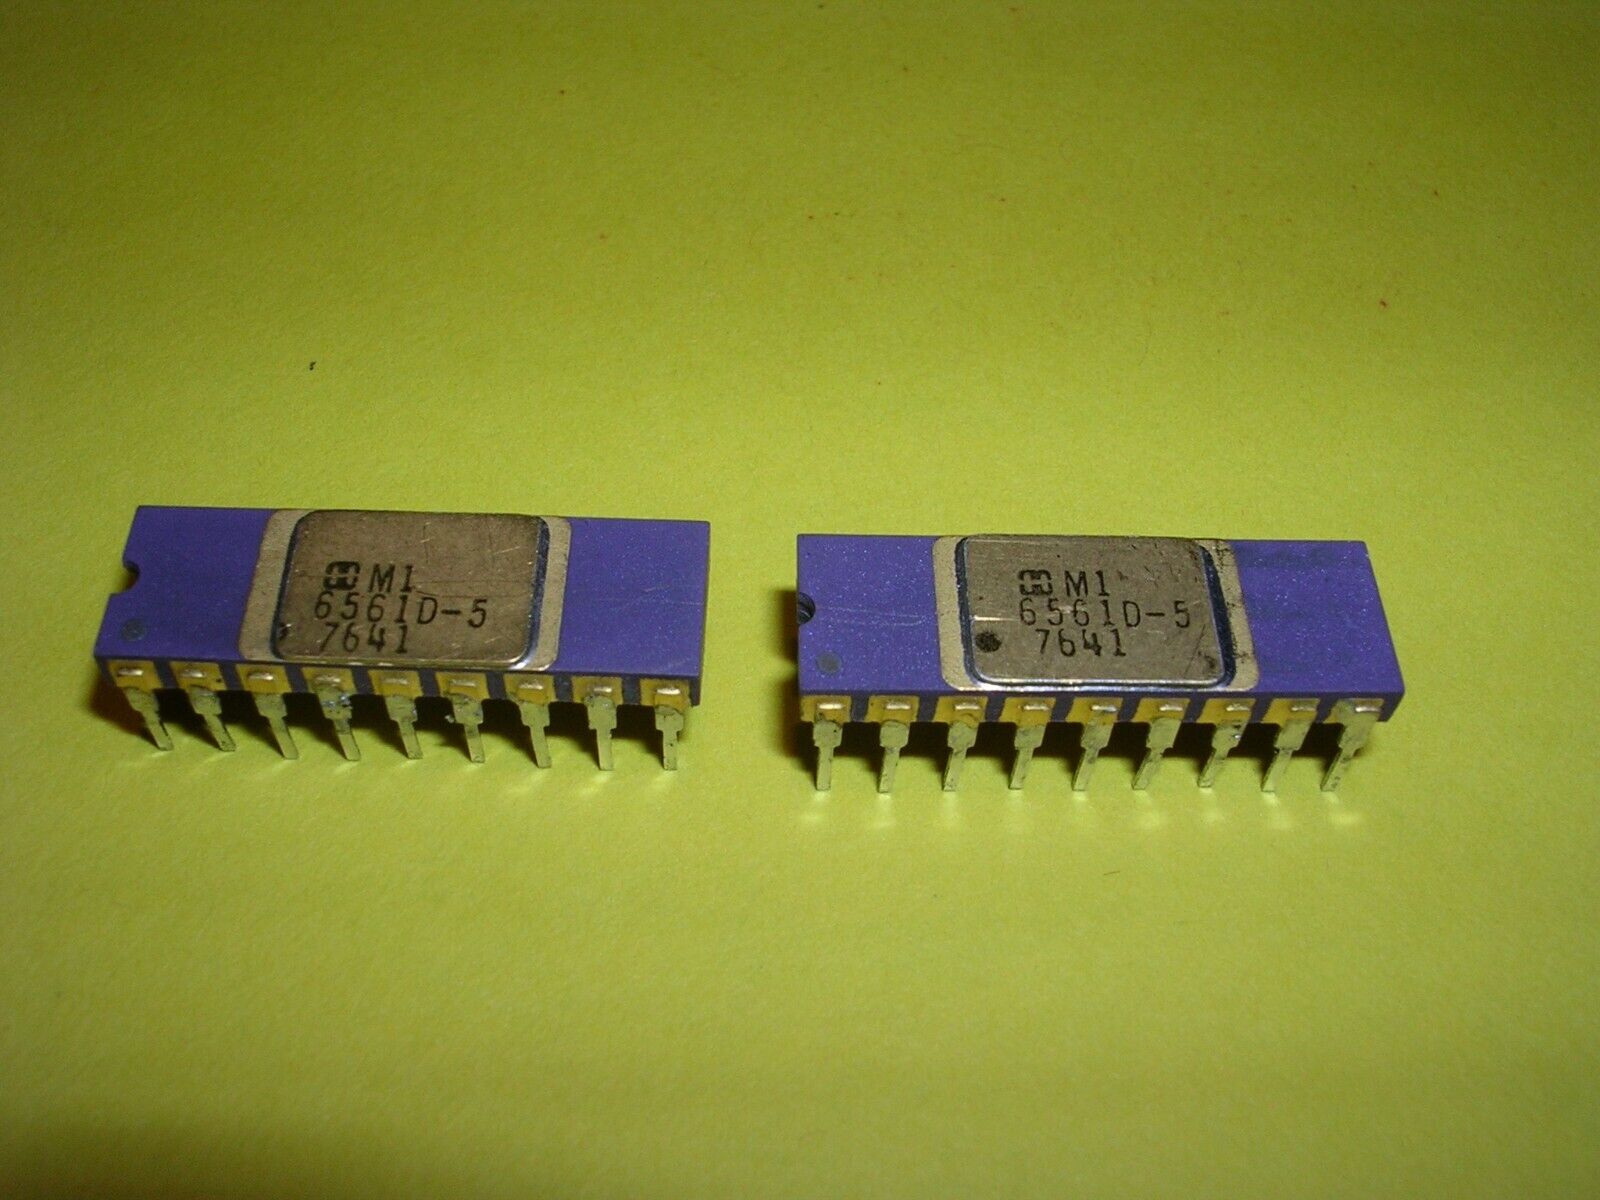 Pair of Two (2) Harris Semiconductor (HM) 6561D-5 (6561) 256 x 4 CMOS RAM Chips